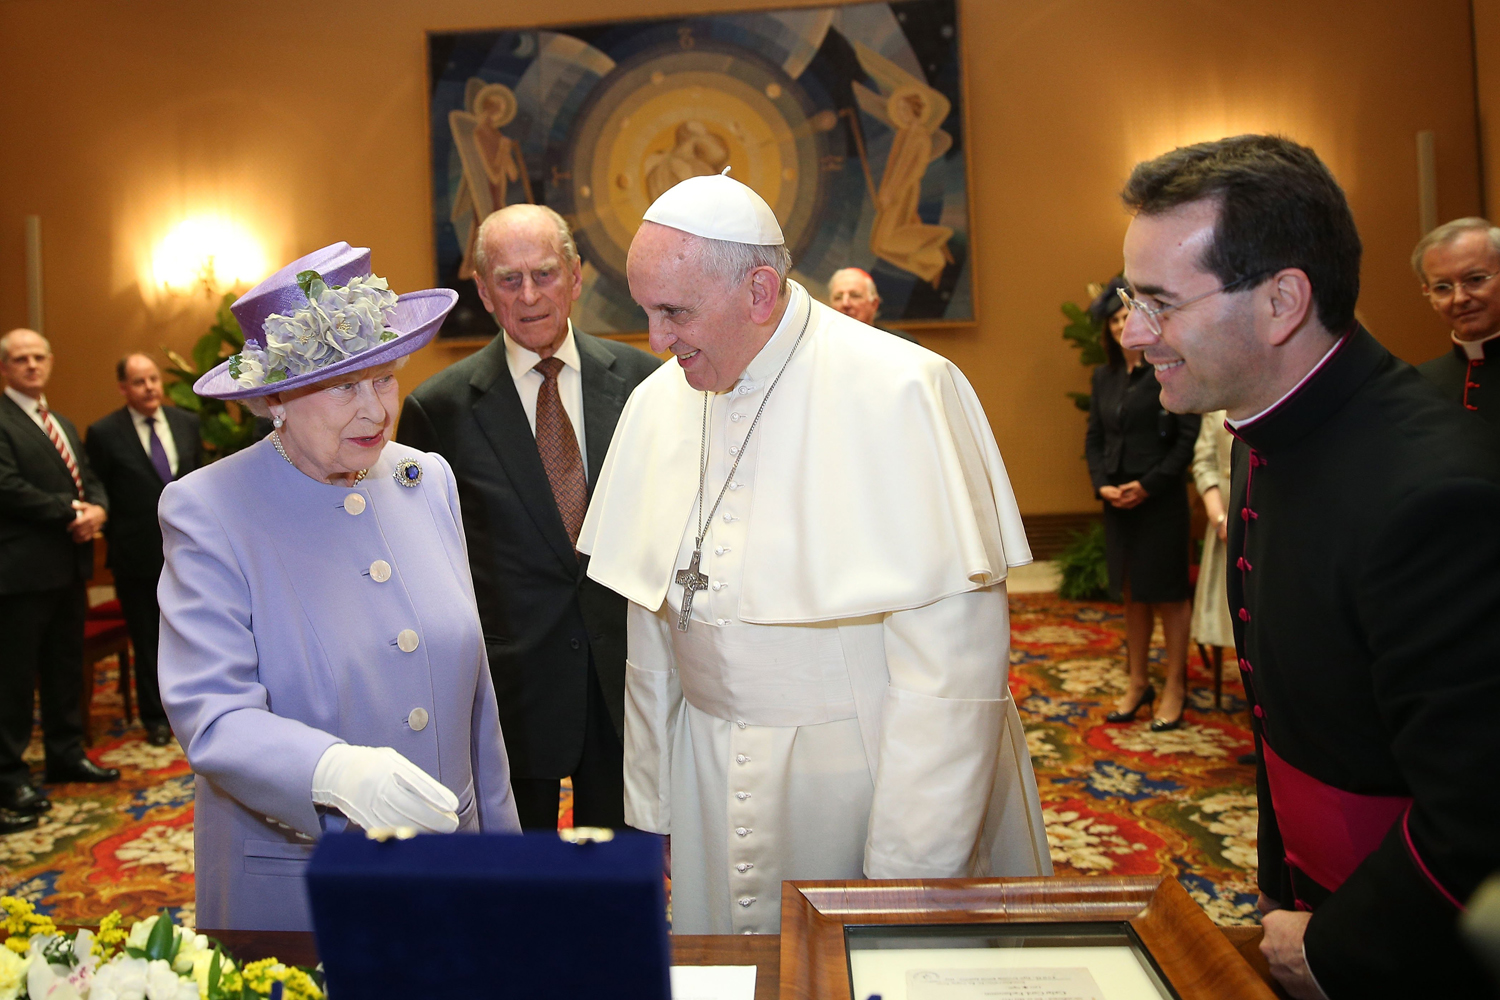 Queen Elizabeth II and Prince Philip, Duke of Edinburgh, have an audience with Pope Francis, during their one-day visit to Rome on April 3, 2014 in Vatican City, Vatican. (Oli Scarff—Getty Images)